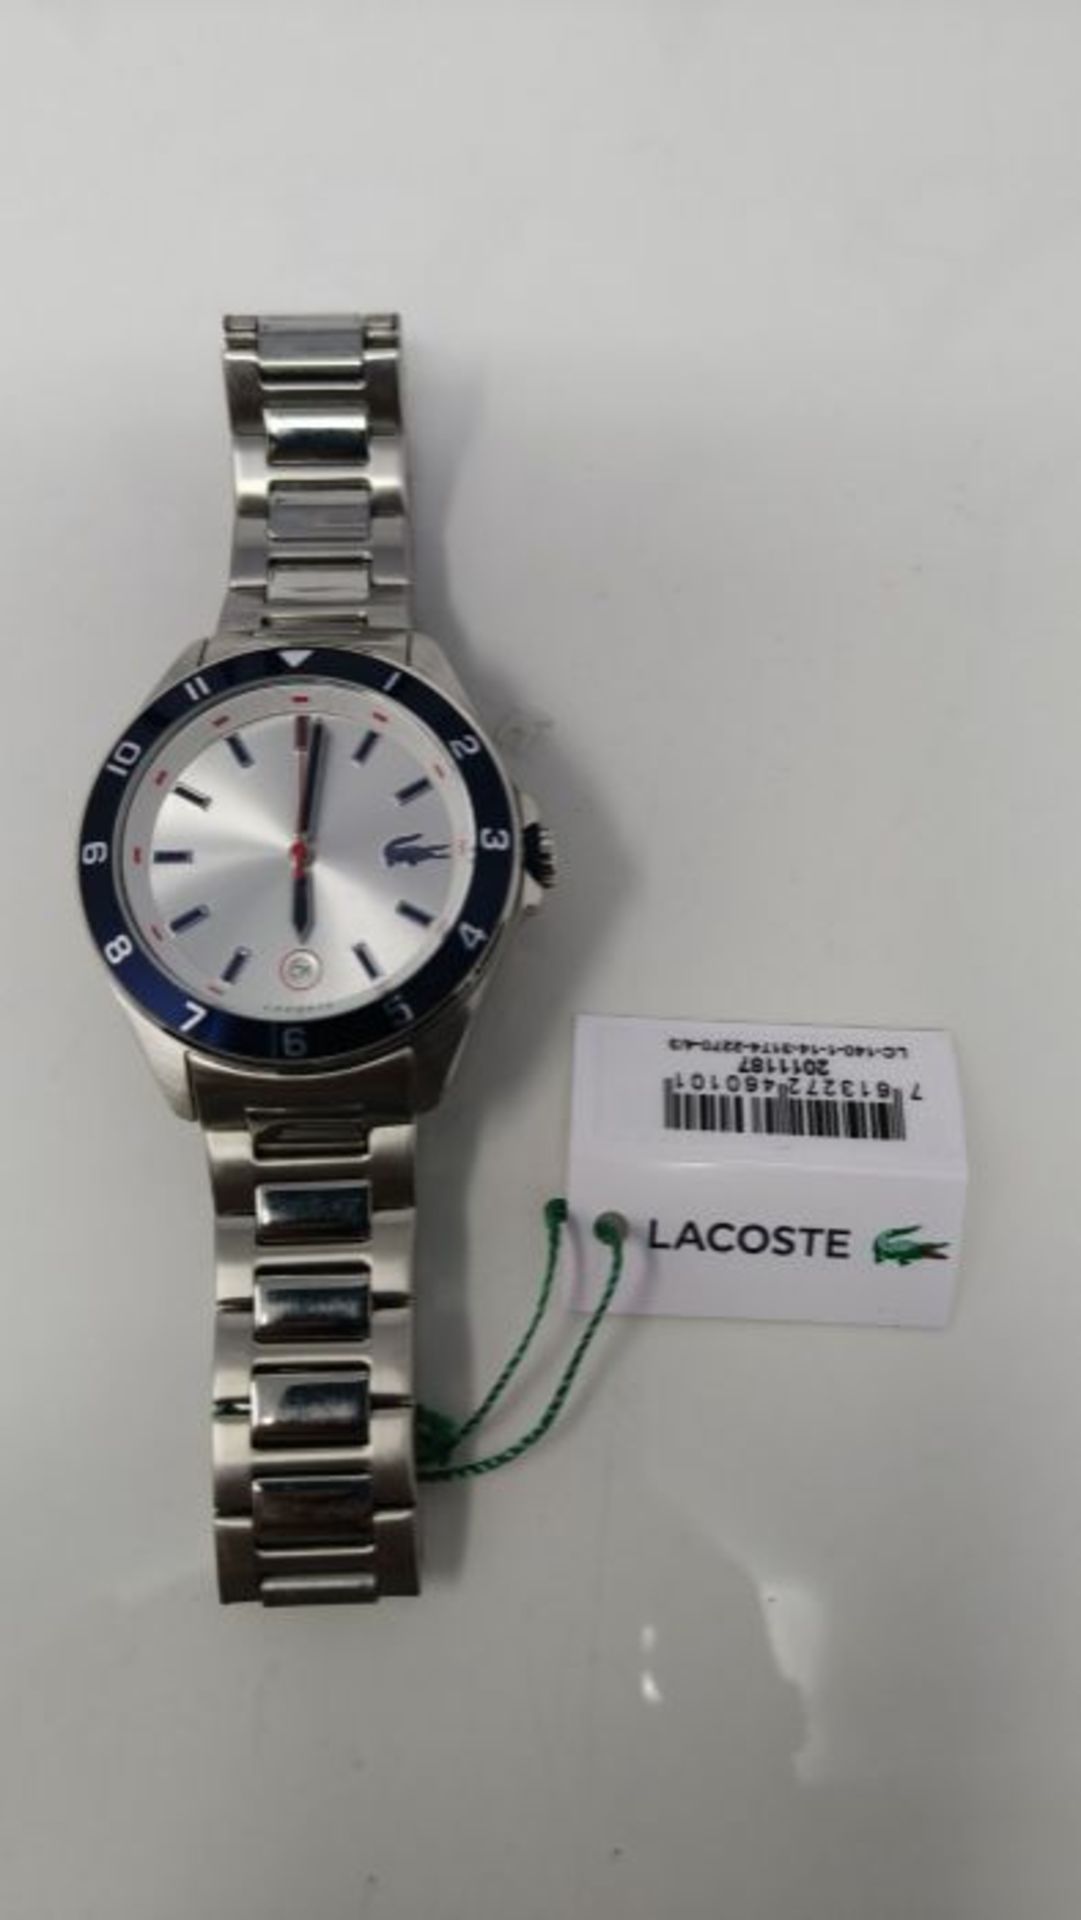 RRP £151.00 Lacoste Men's Analog Quartz Watch with Stainless Steel Strap 2011187 - Image 2 of 3